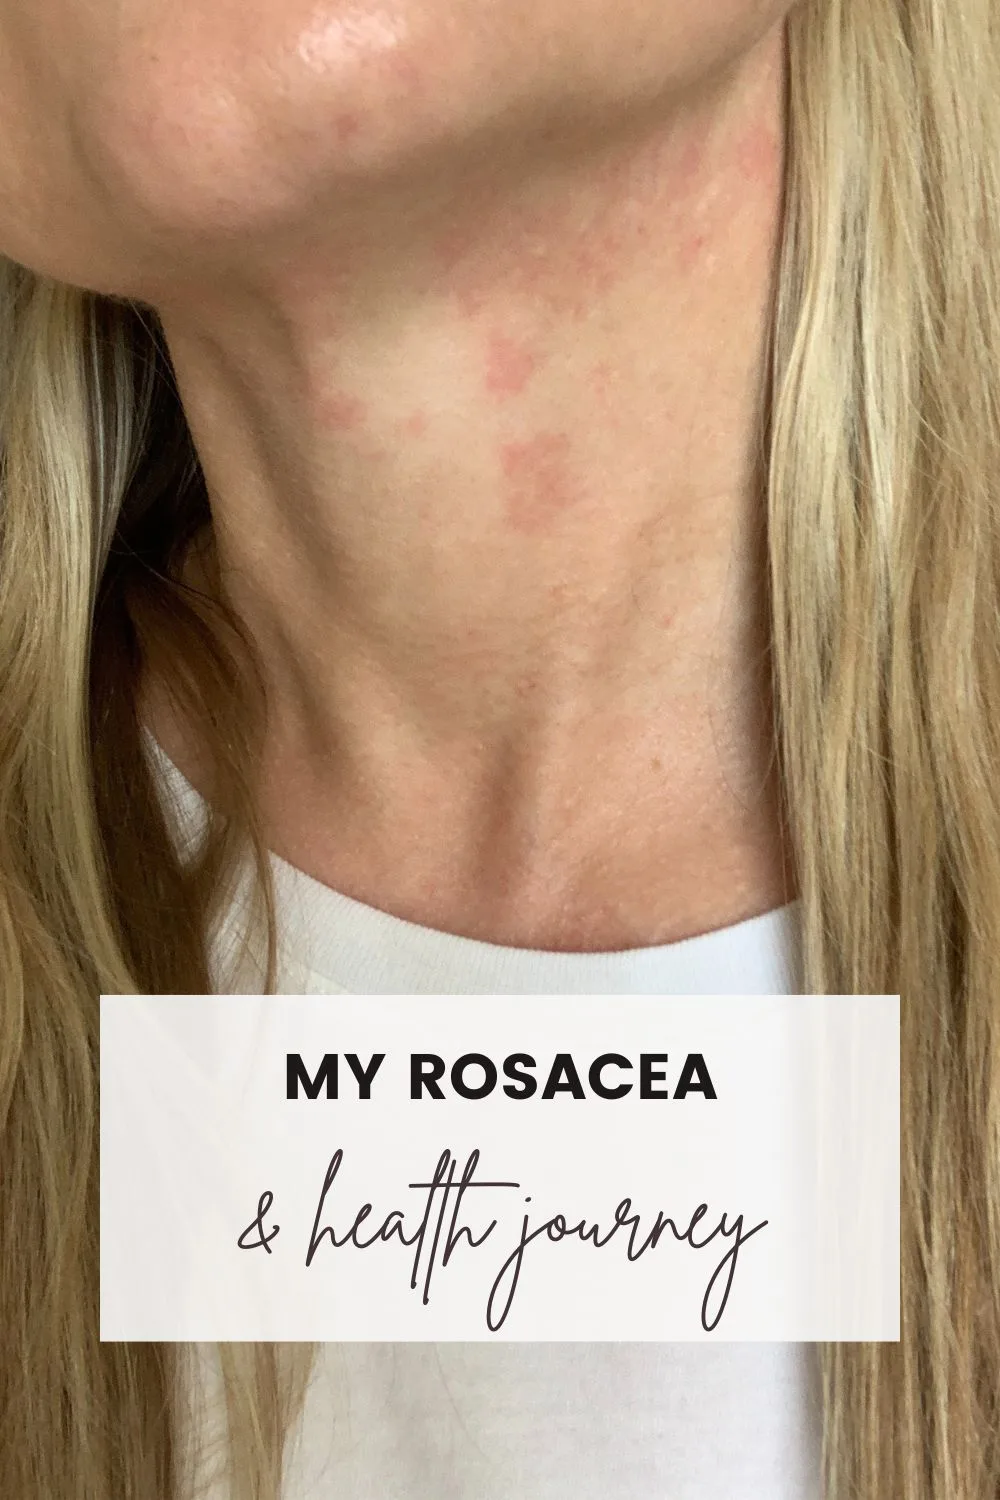 Flushed, hive neck inflamed from rosacea.